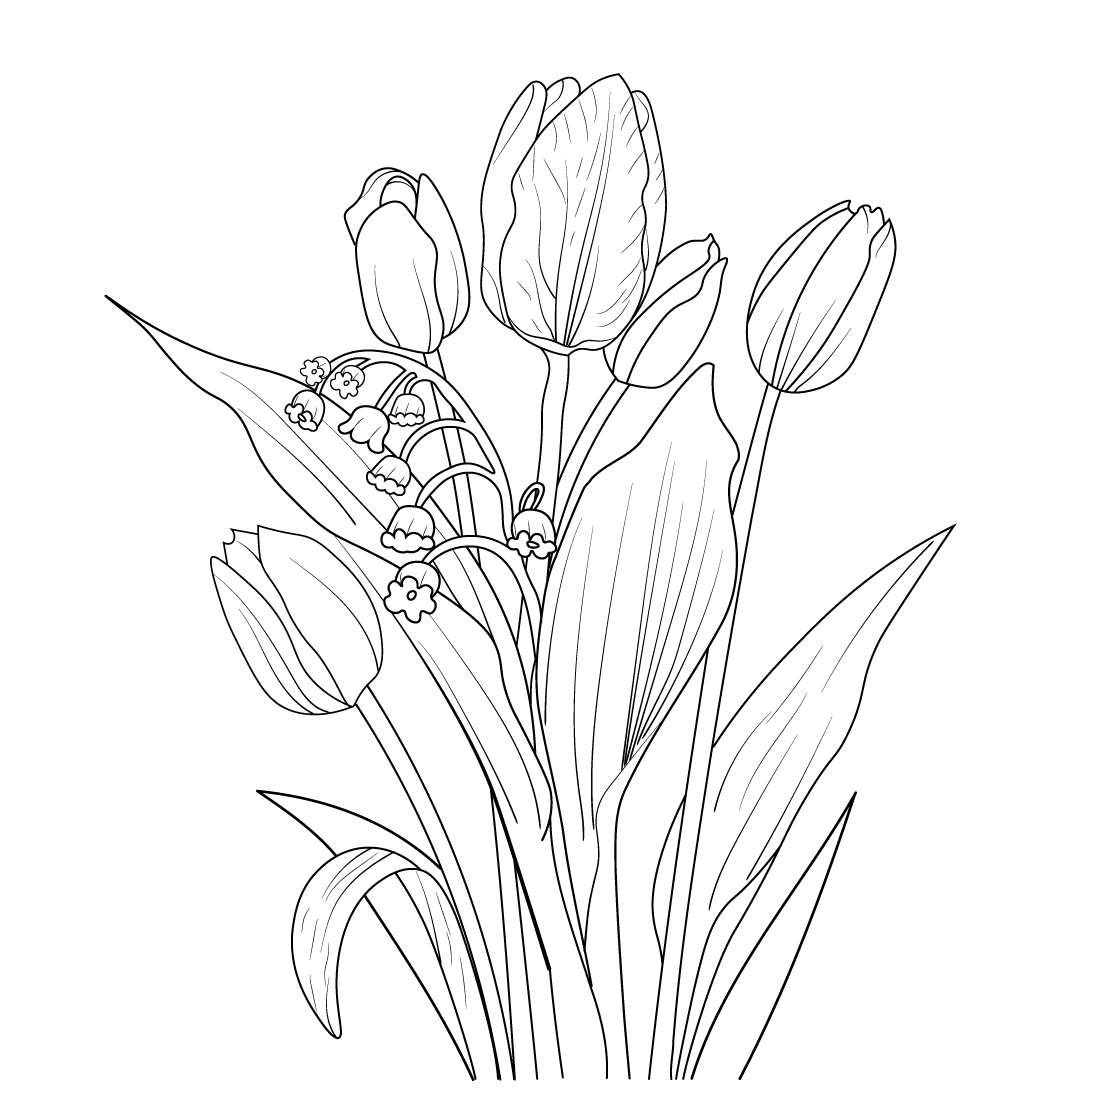 Flowers In Sketch Style HighRes Vector Graphic  Getty Images